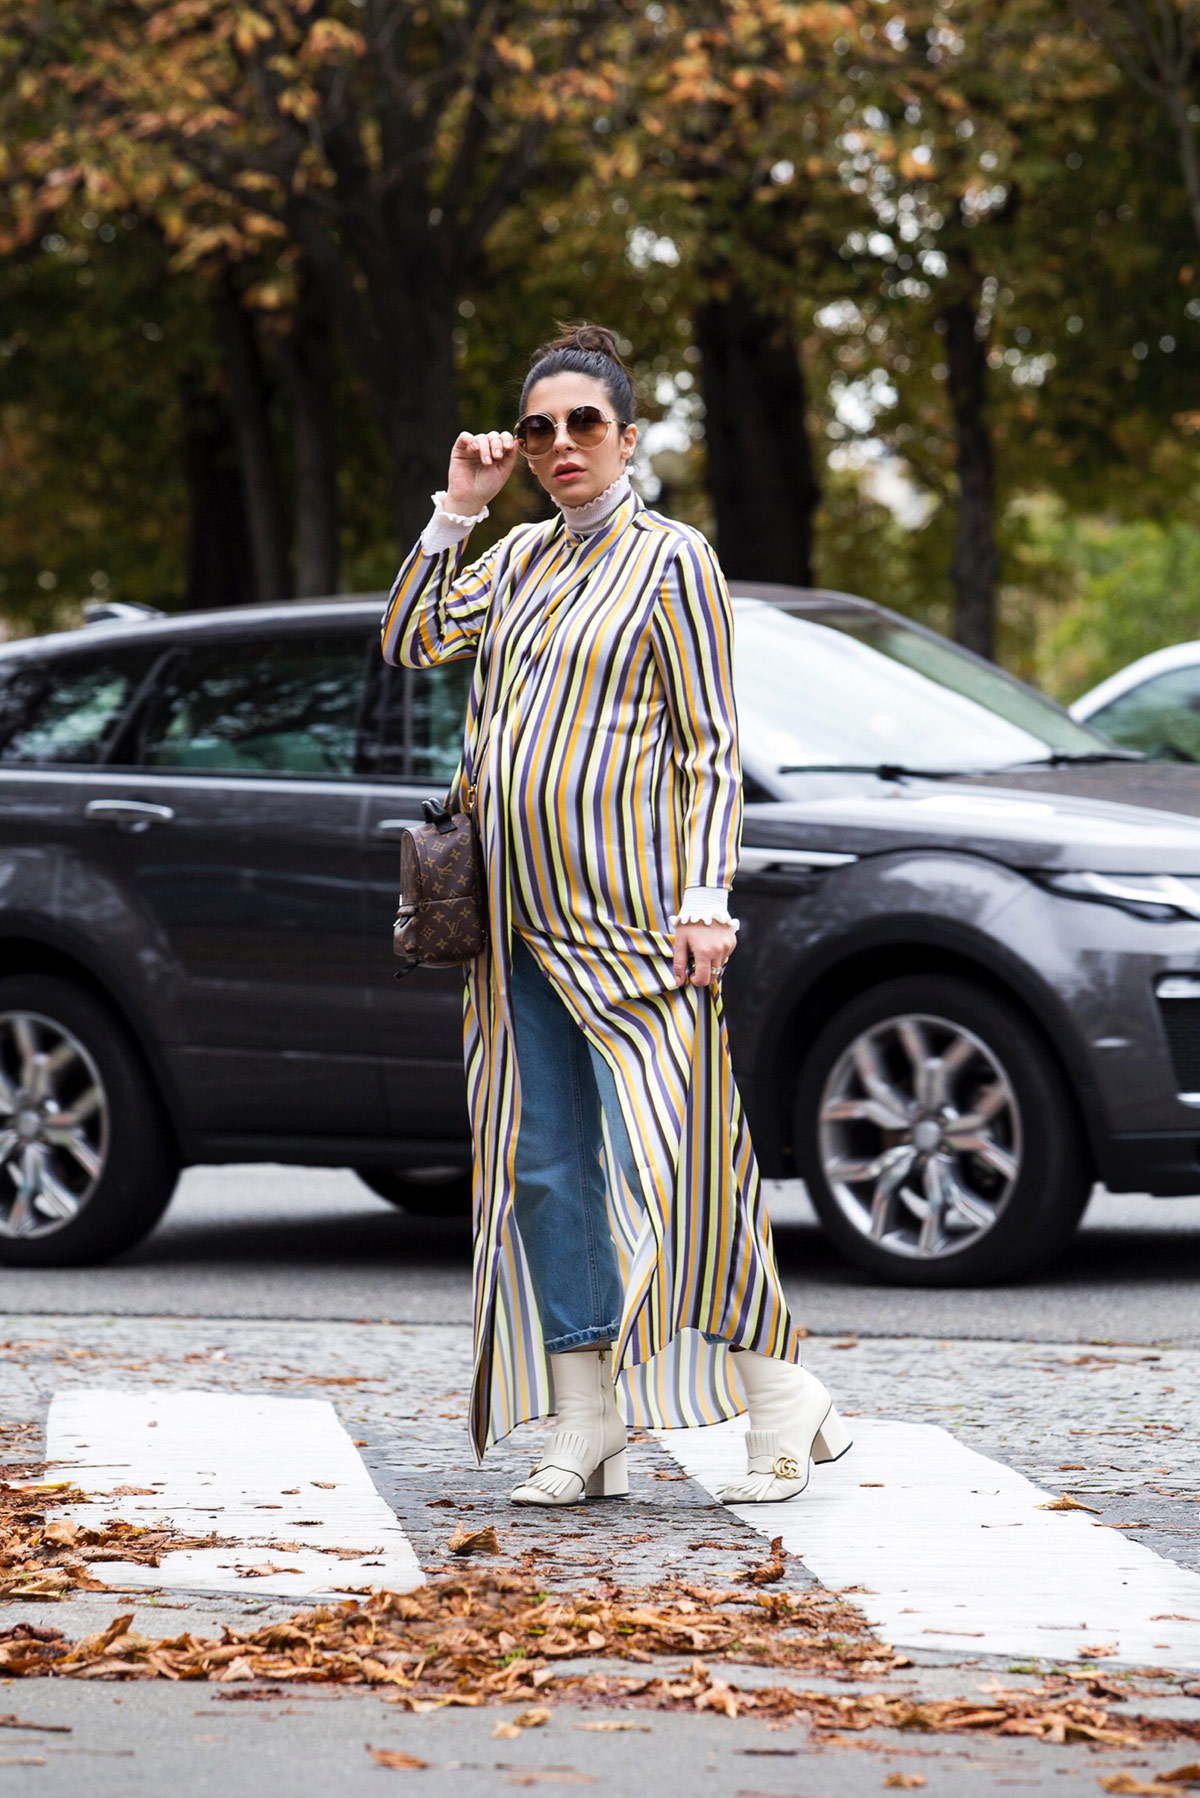 Stella Asteria wearing striped dress with jeans at Paris Fashion Week SS'18